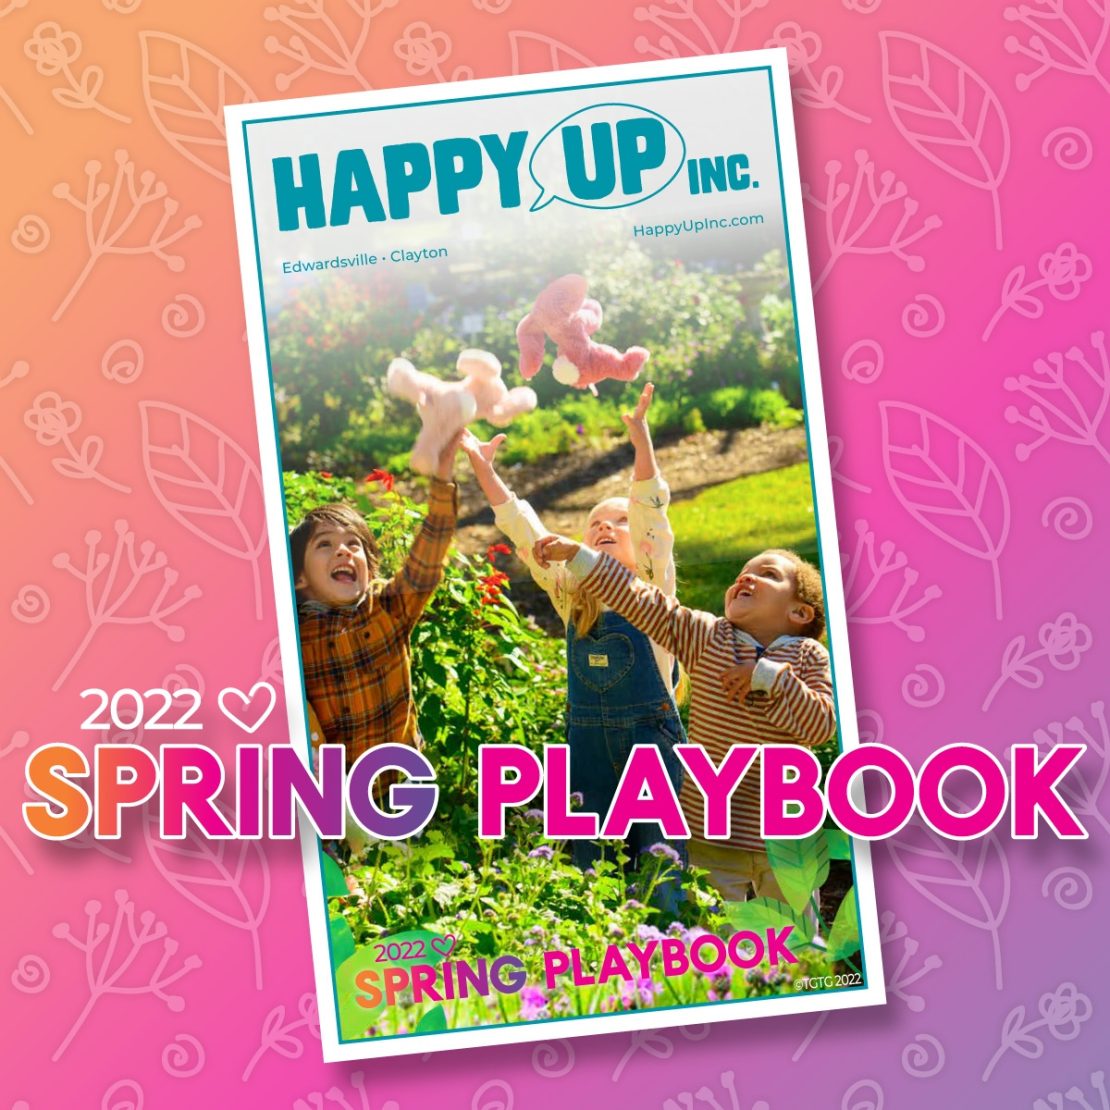 Shop and browse the collection of Happy Up's Spring Catalog items here!